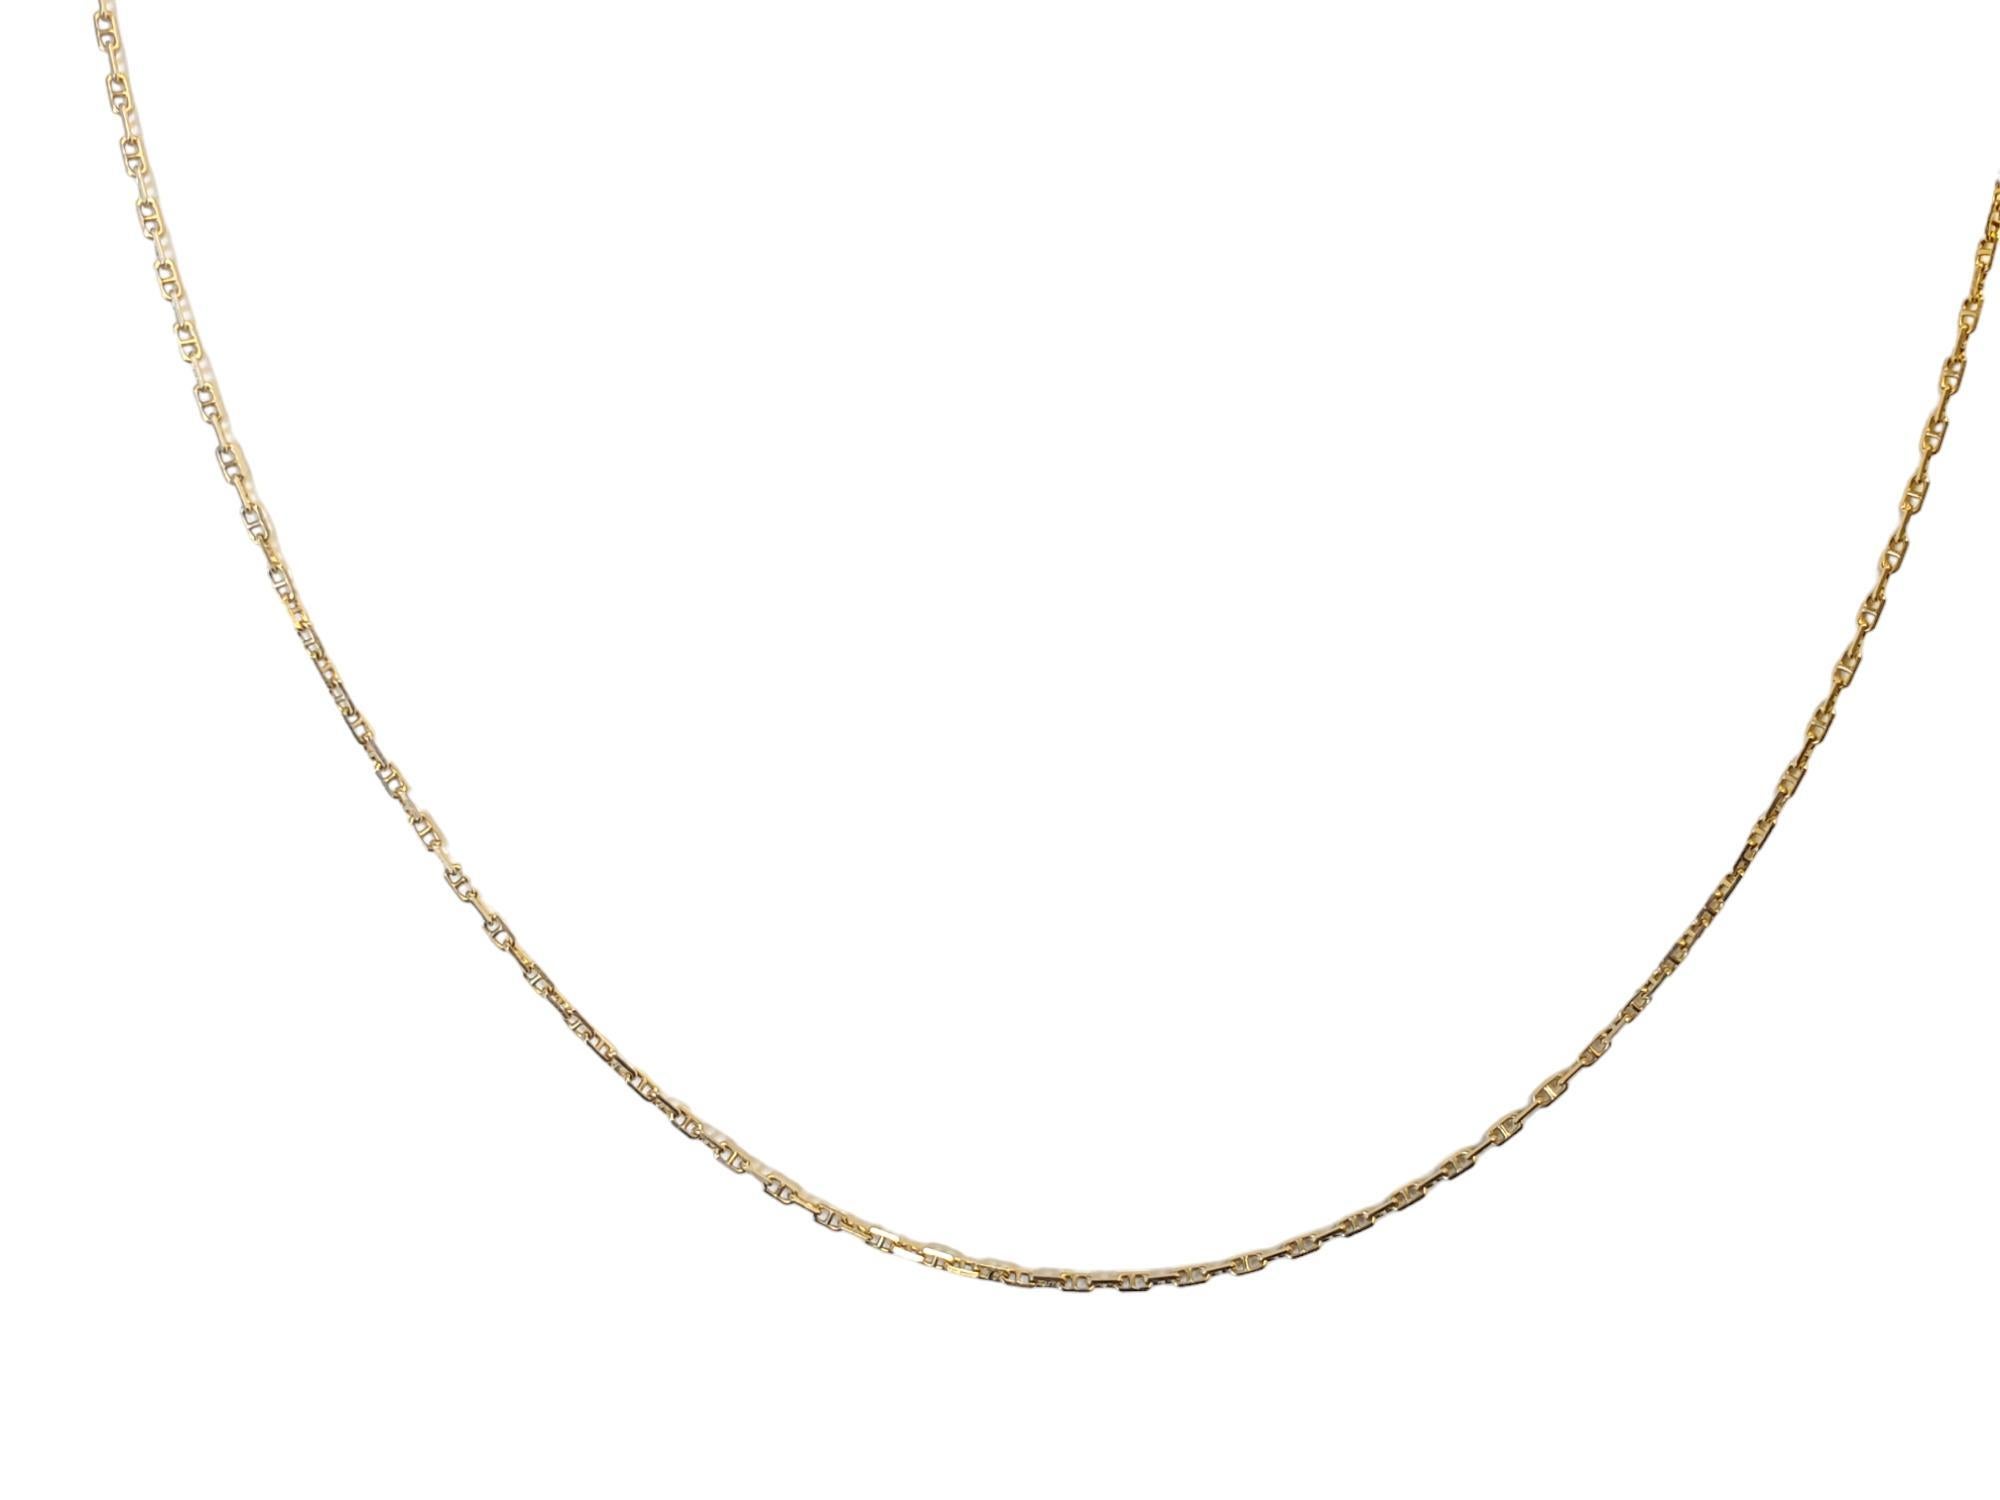 Women's Vintage Italian 14k Chain Yellow Gold Stamped Link Necklace Minimalistic For Sale